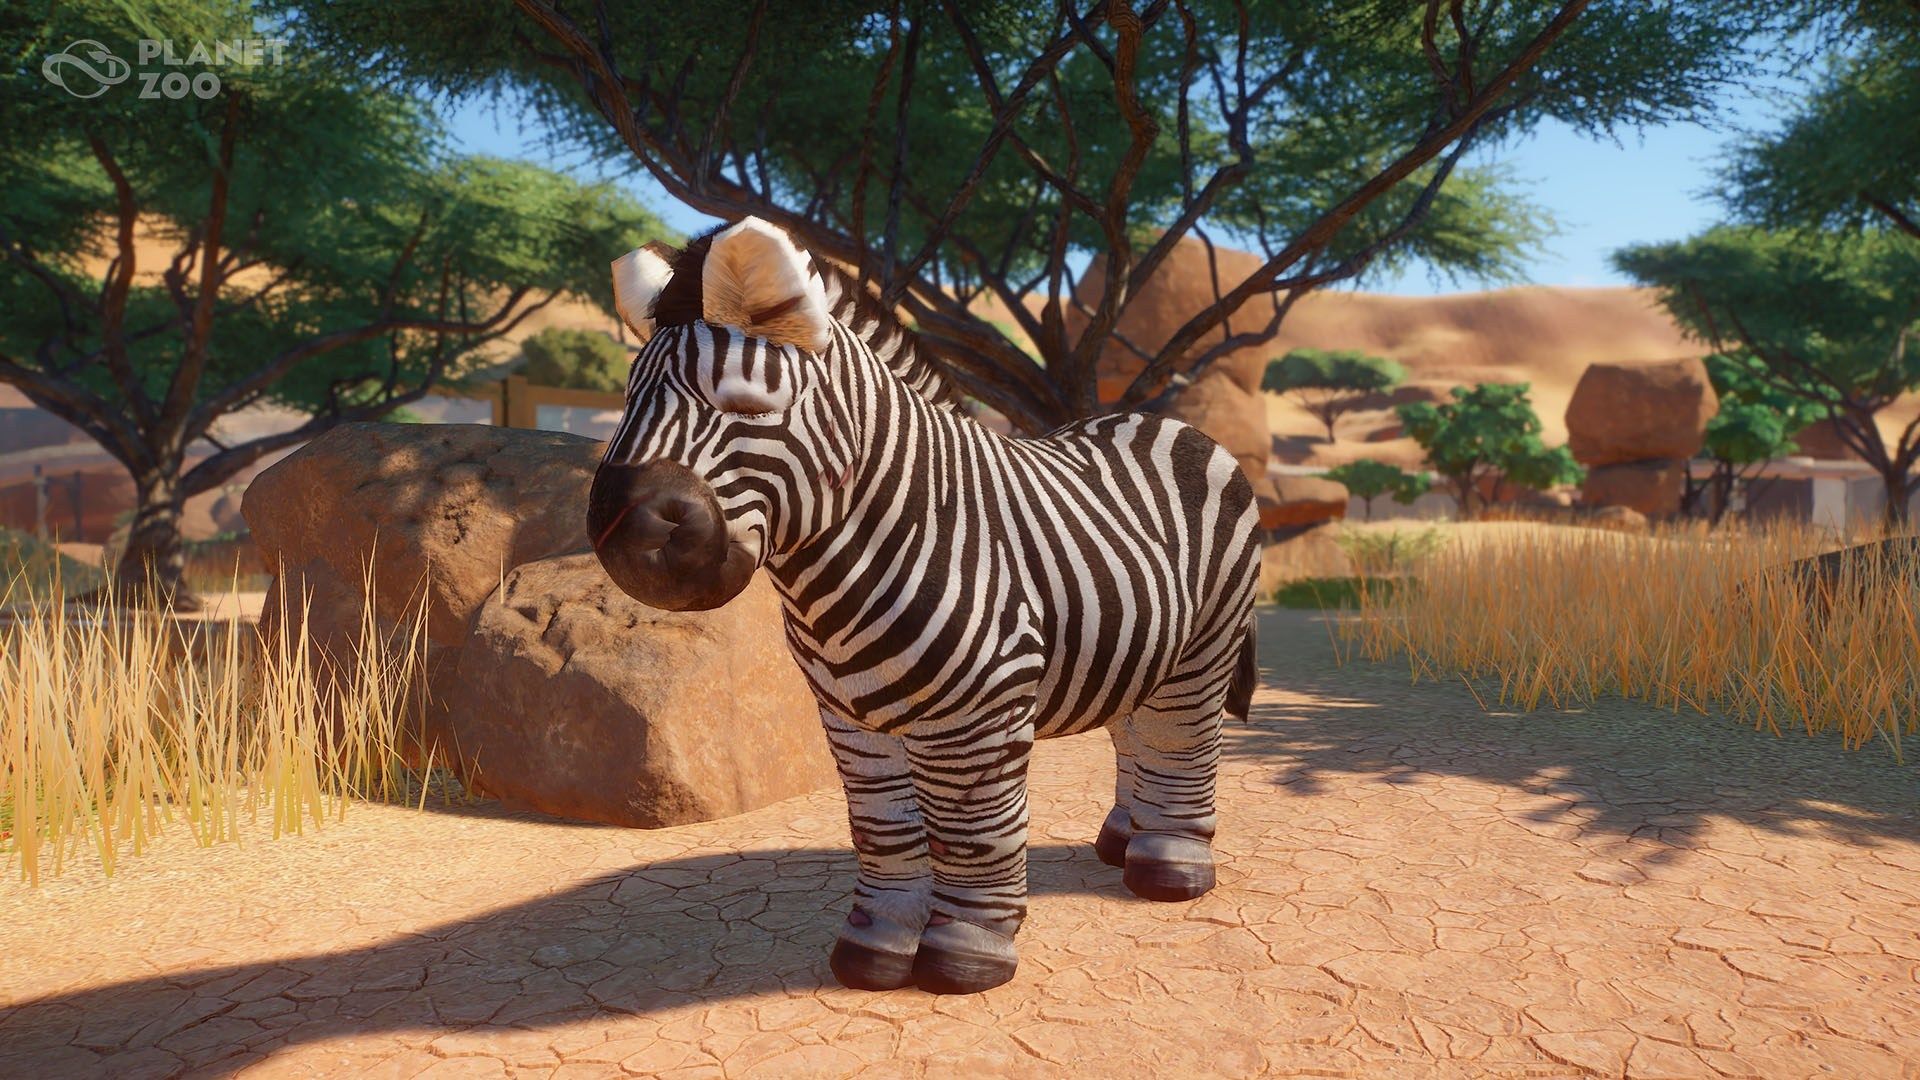 Planet Zoo's animals get super chonky with newly unlocked Easter